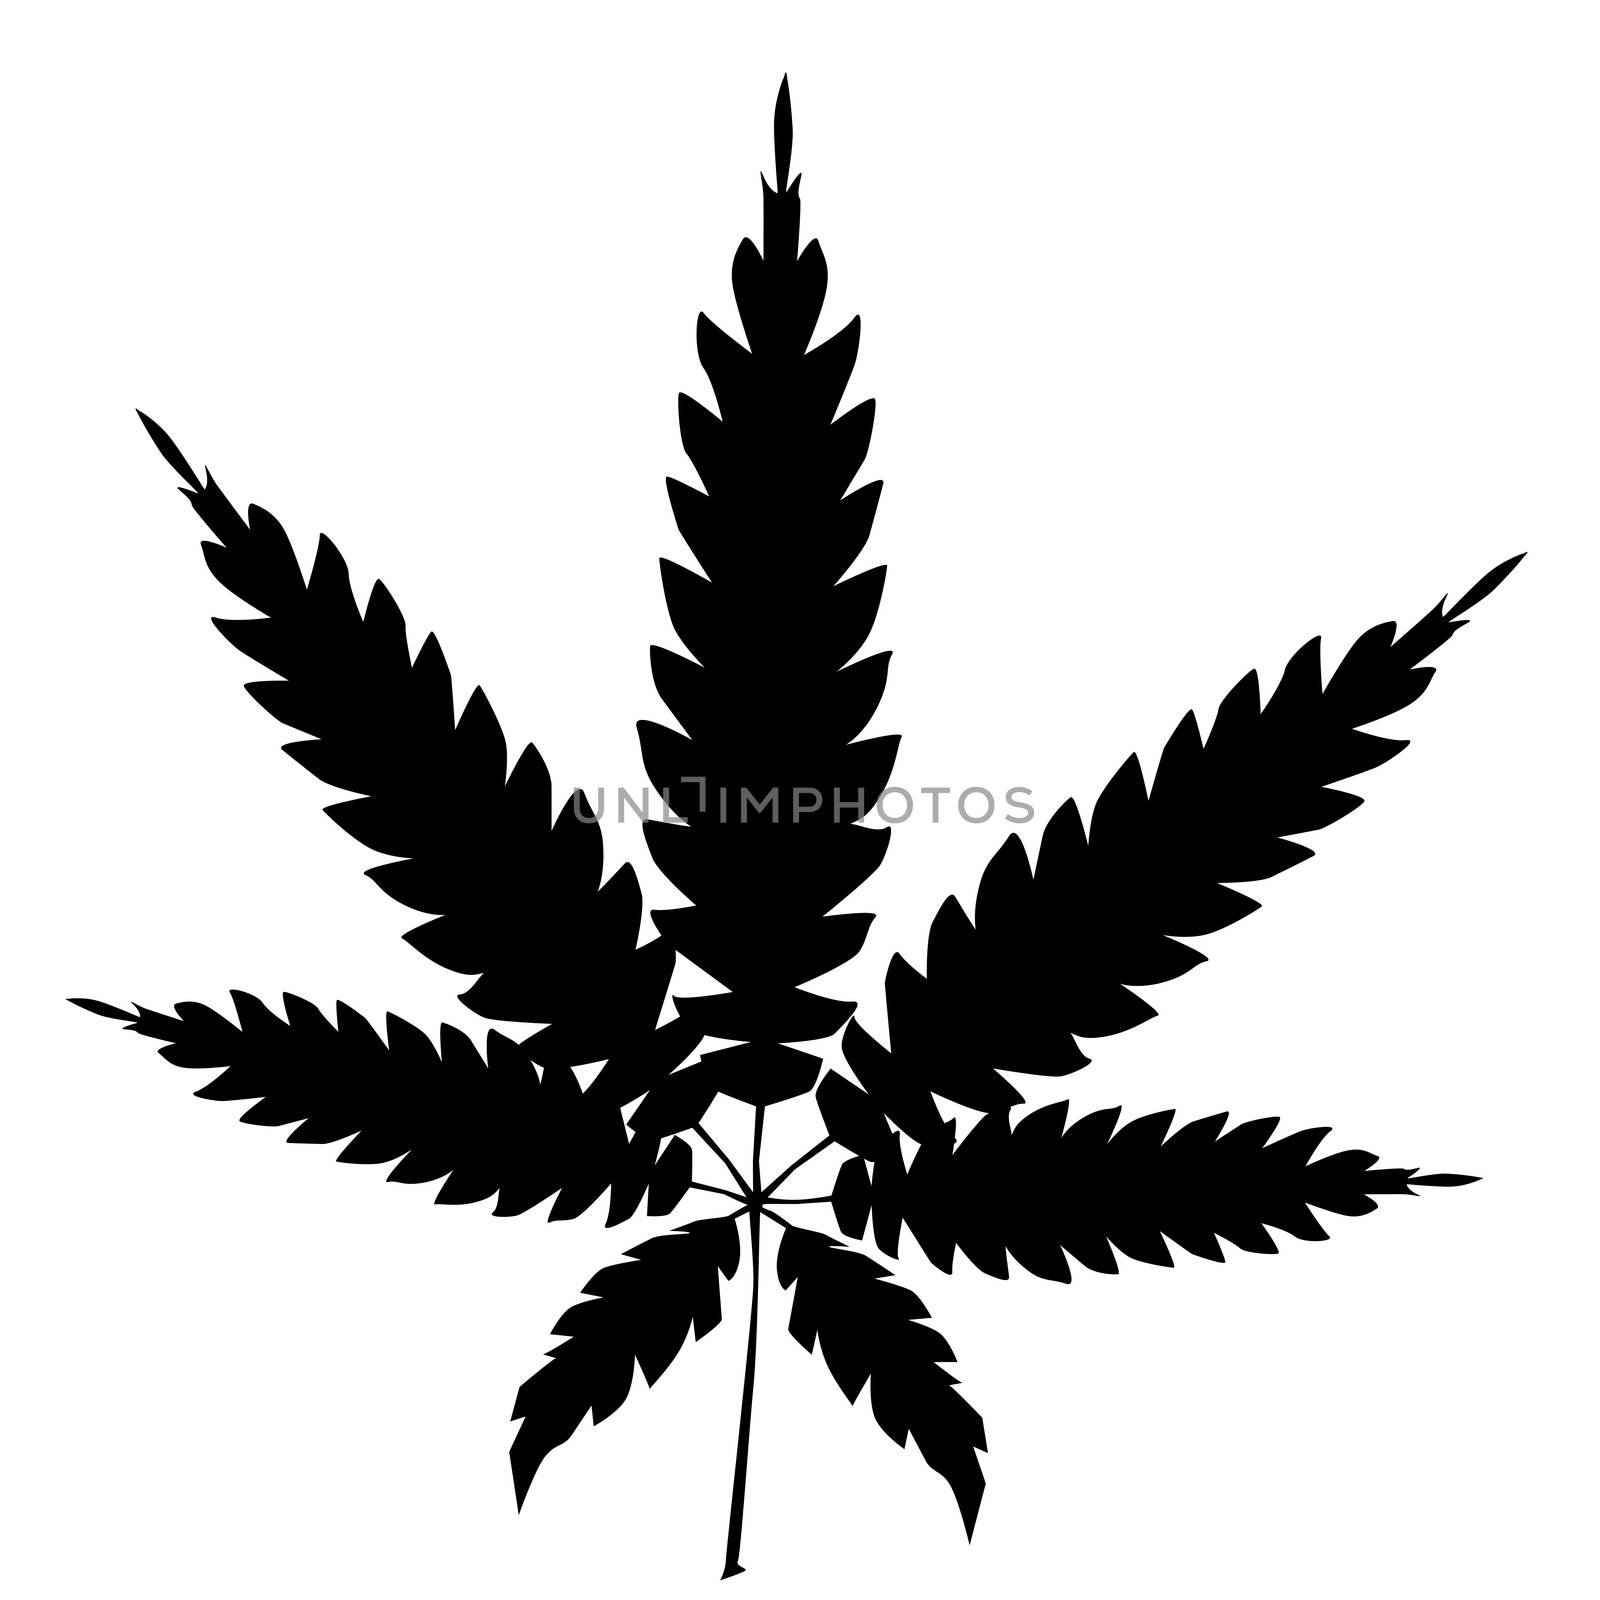 A cannabis leaf silhouette isolated over a white background.